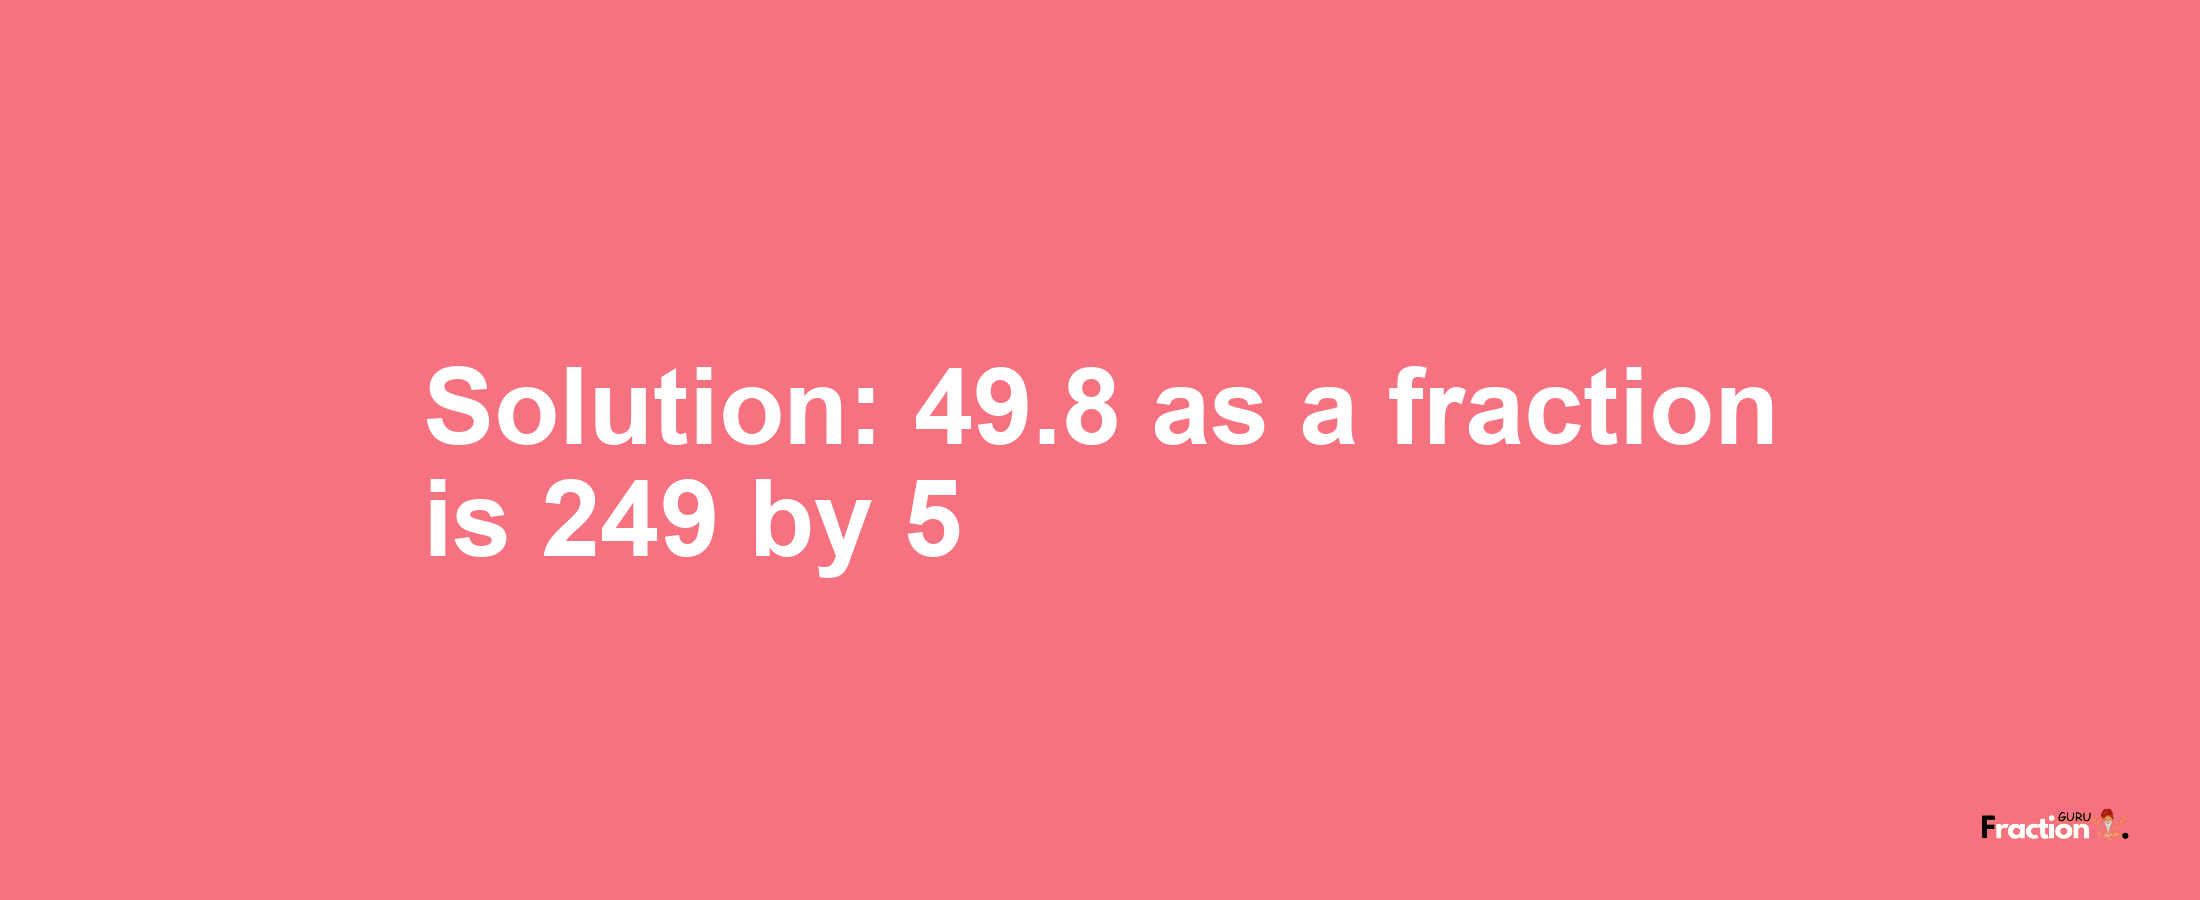 Solution:49.8 as a fraction is 249/5